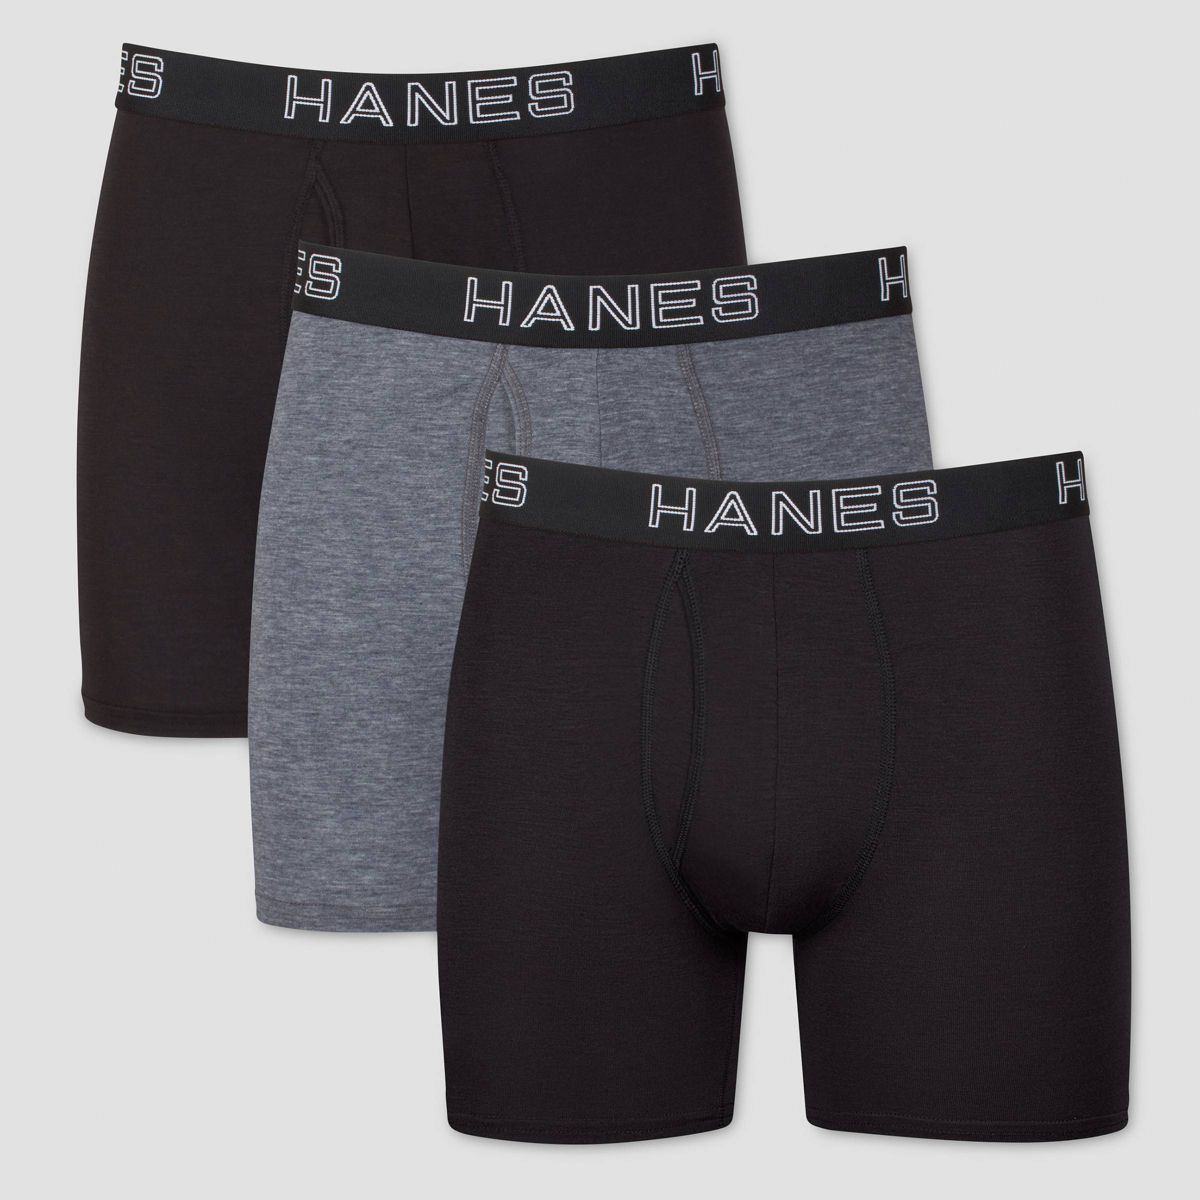 Hanes Premium Men's 3pk Boxer Briefs with Anti Chafing Total Support Pouch | Target